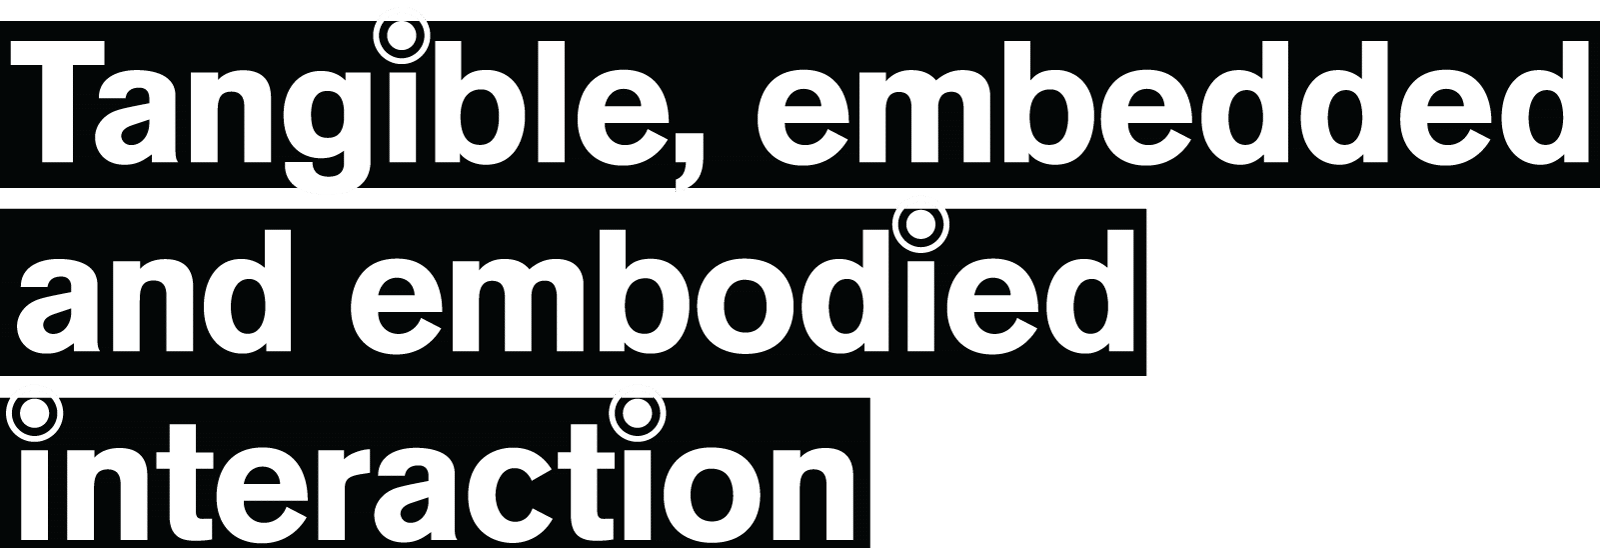 Tangible, embedded and embodied interaction (text)